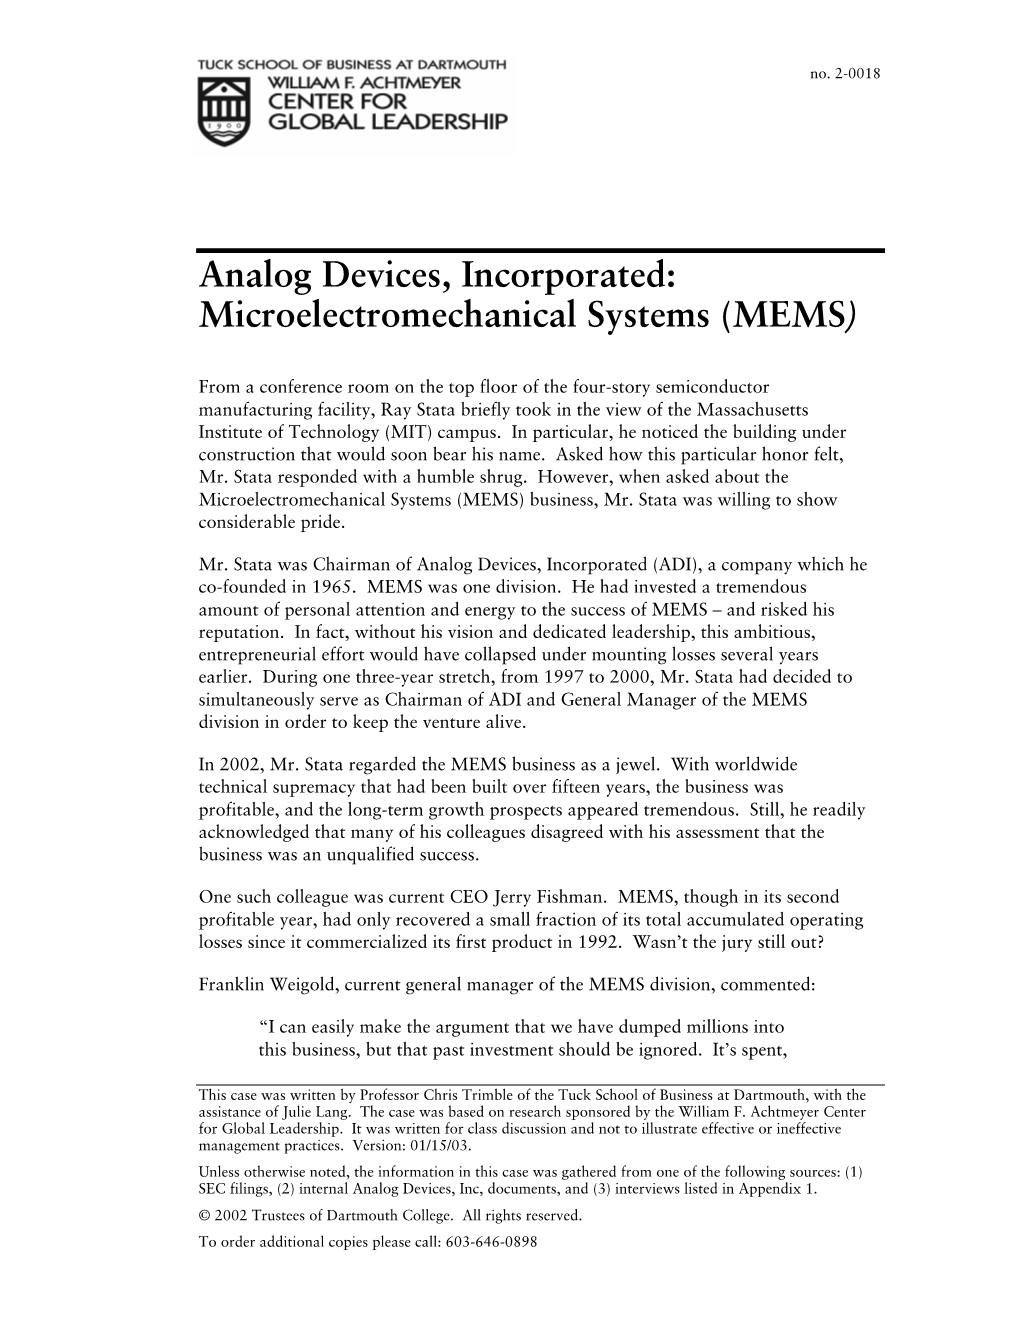 Analog Devices, Incorporated: Microelectromechanical Systems (MEMS)